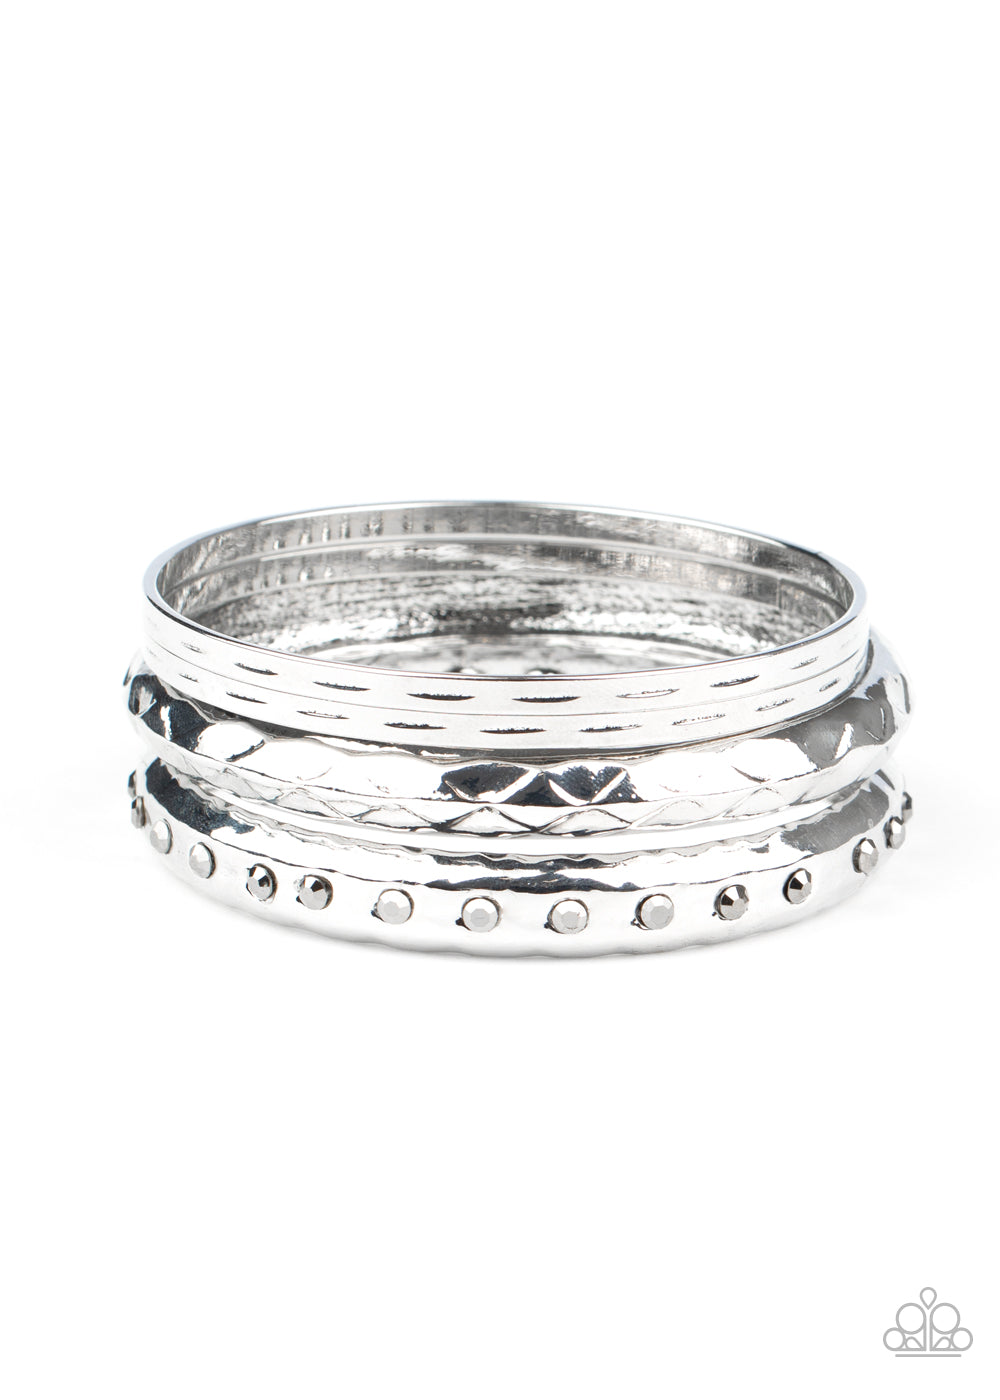 &lt;P&gt;A stack of silver bangles is hammered in texture, creating light-catching edges that reflect an immense amount of shine. One bangle is lined with smoky hematite rhinestones, adding a hint of twinkle. &lt;/P&gt;

&lt;P&gt;&lt;I&gt; Sold as one set of four bracelets.&lt;/I&gt;&lt;/p&gt;

&lt;img src=\&quot;https://d9b54x484lq62.cloudfront.net/paparazzi/shopping/images/517_tag150x115_1.png\&quot; alt=\&quot;New Kit\&quot; align=\&quot;middle\&quot; height=\&quot;50\&quot; width=\&quot;50\&quot;/&gt;